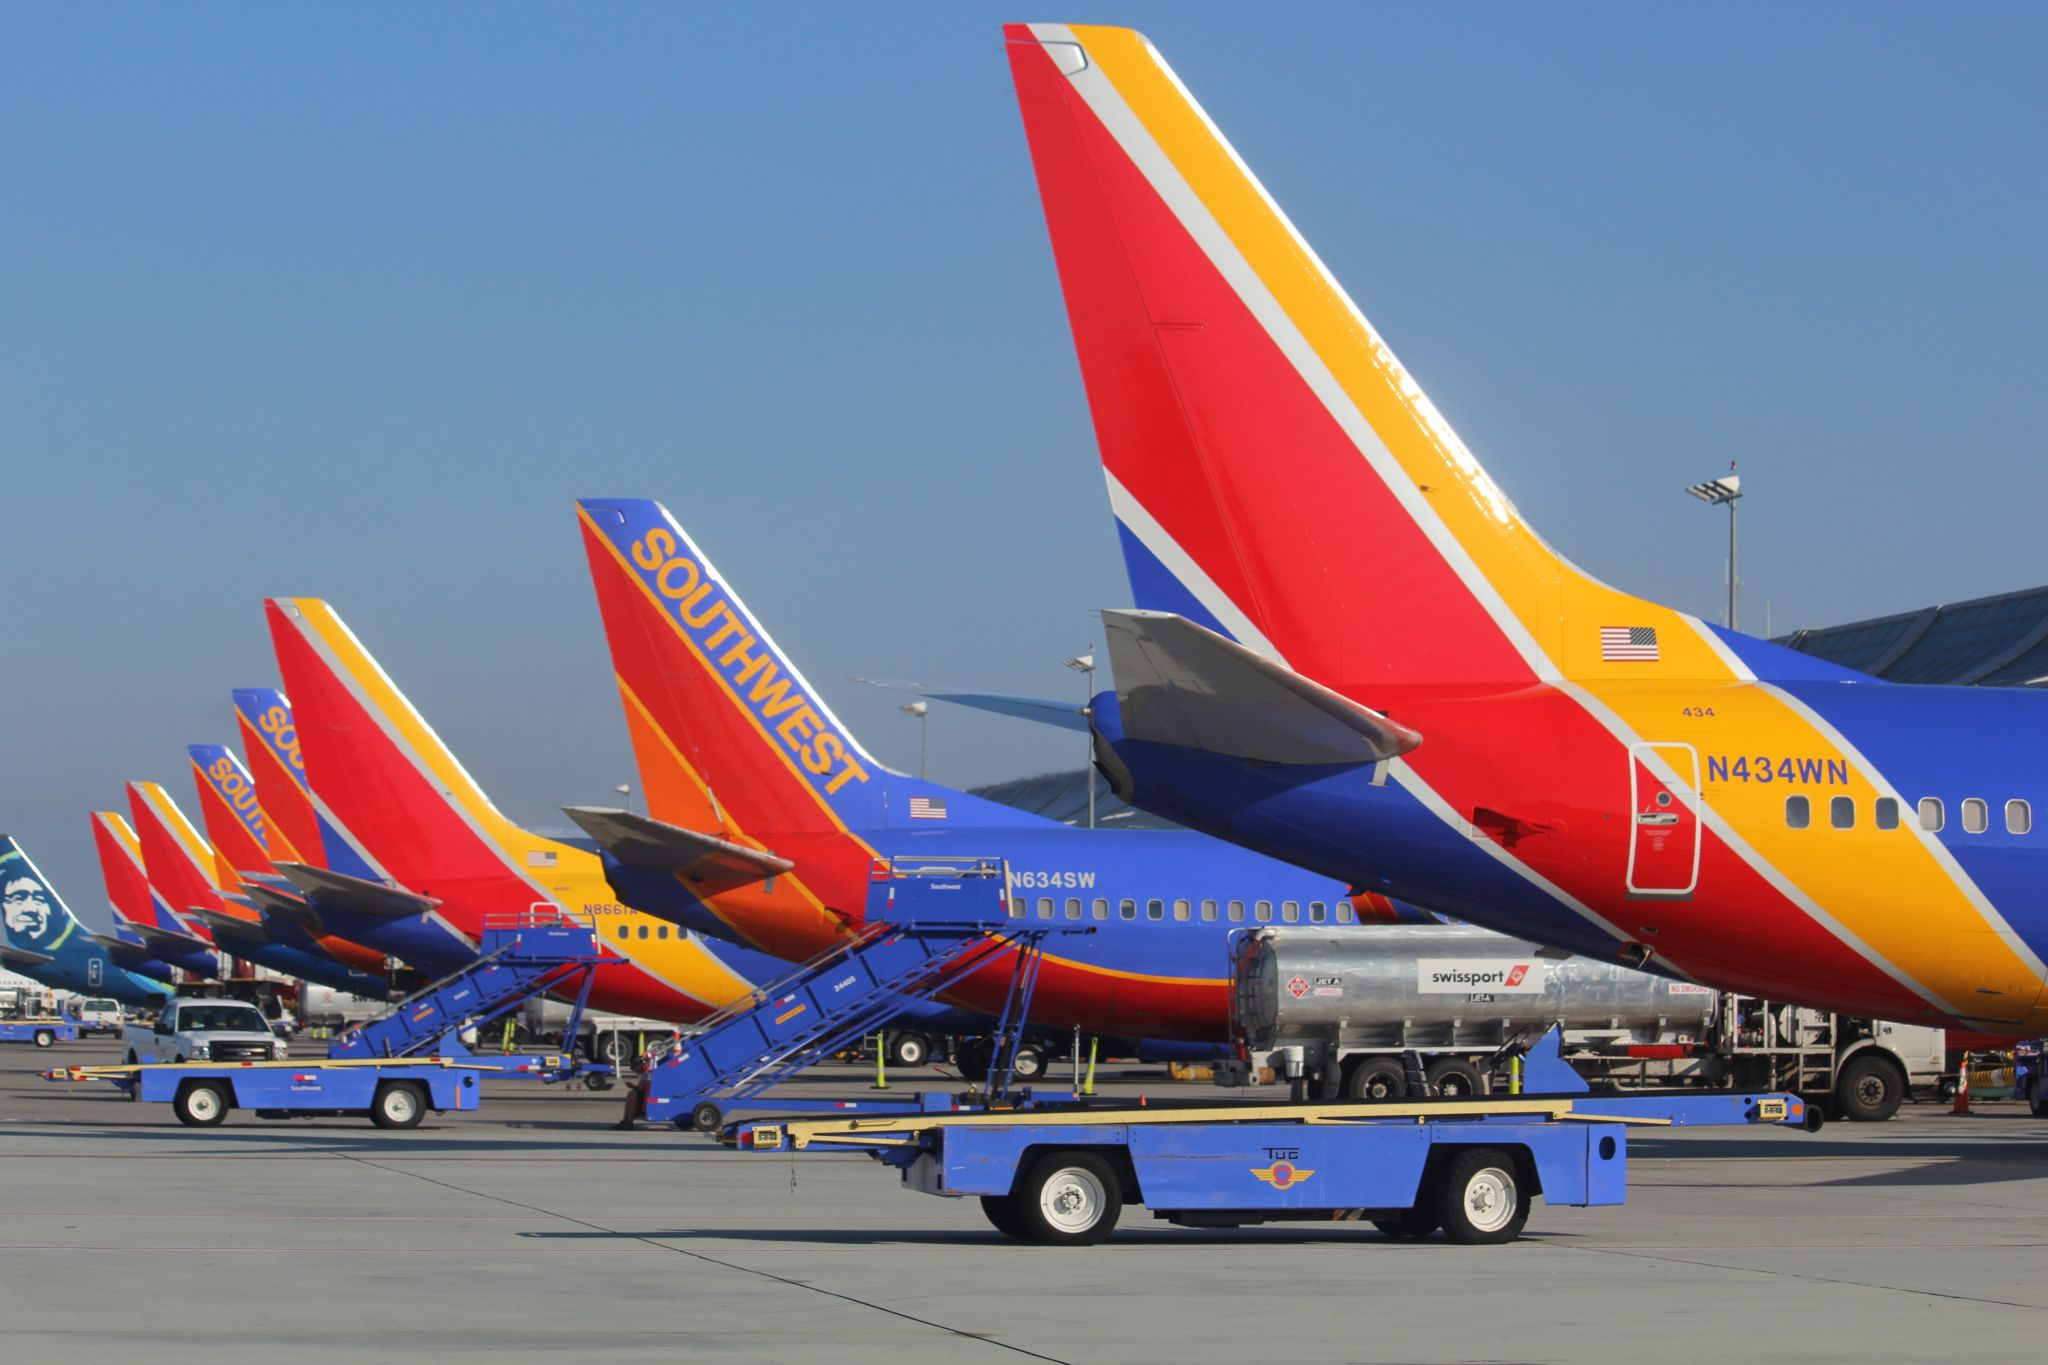 southwest airlines promo code 2021